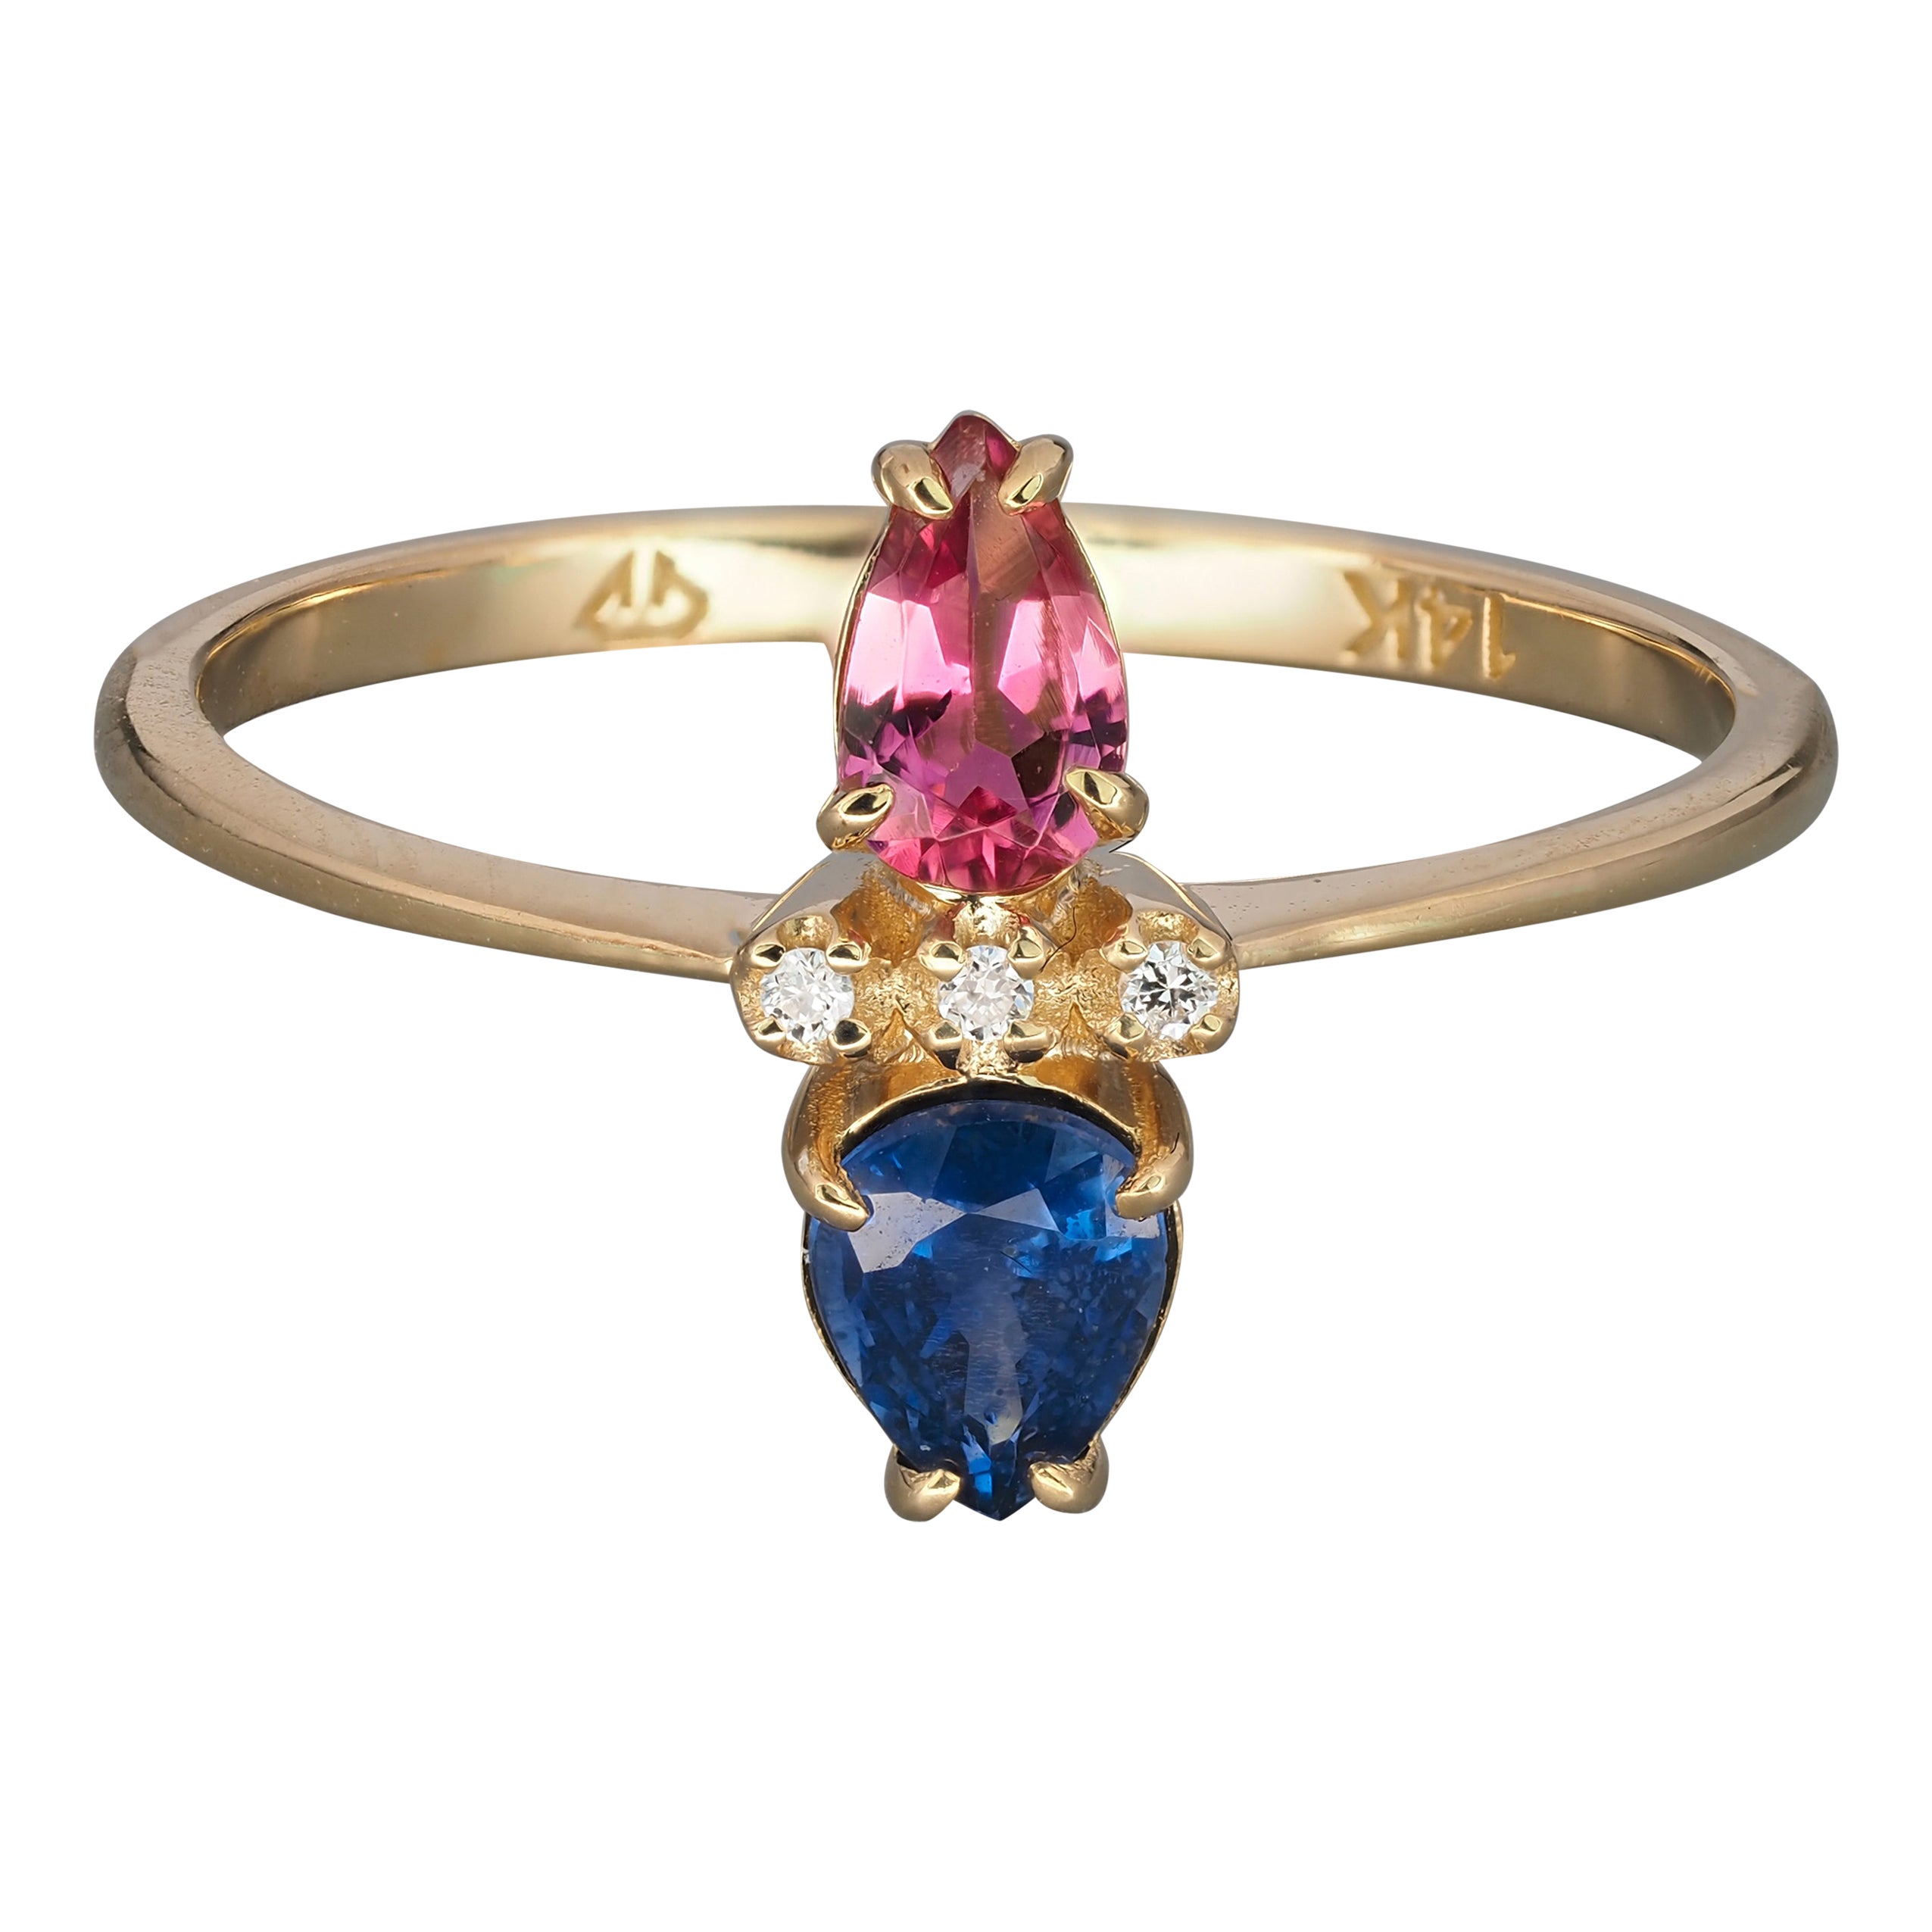 For Sale:  14k Gold Ring in Art Deco Style with Central Sapphire, Tourmaline and Diamonds